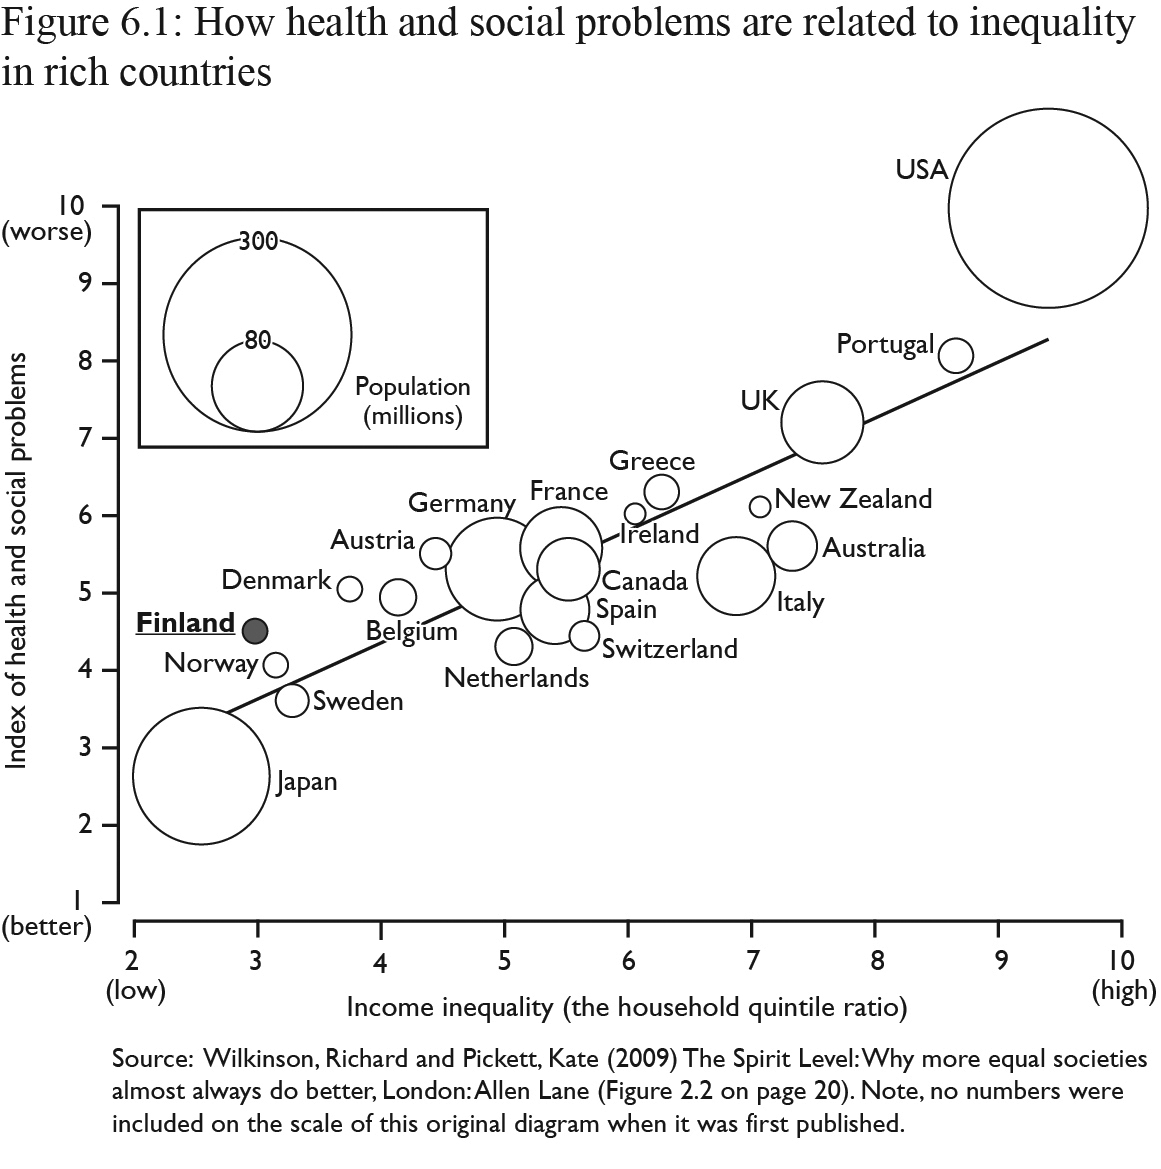 Figure 6.1: Source: Wilkinson, R. and Pickett, K. (2009) The Spirit Level: Why more equal societies almost always do better, London: Allen Lane (Figure 2.2 on page 20). Note, no numbers were included on the scale of this original diagram when it was first published.